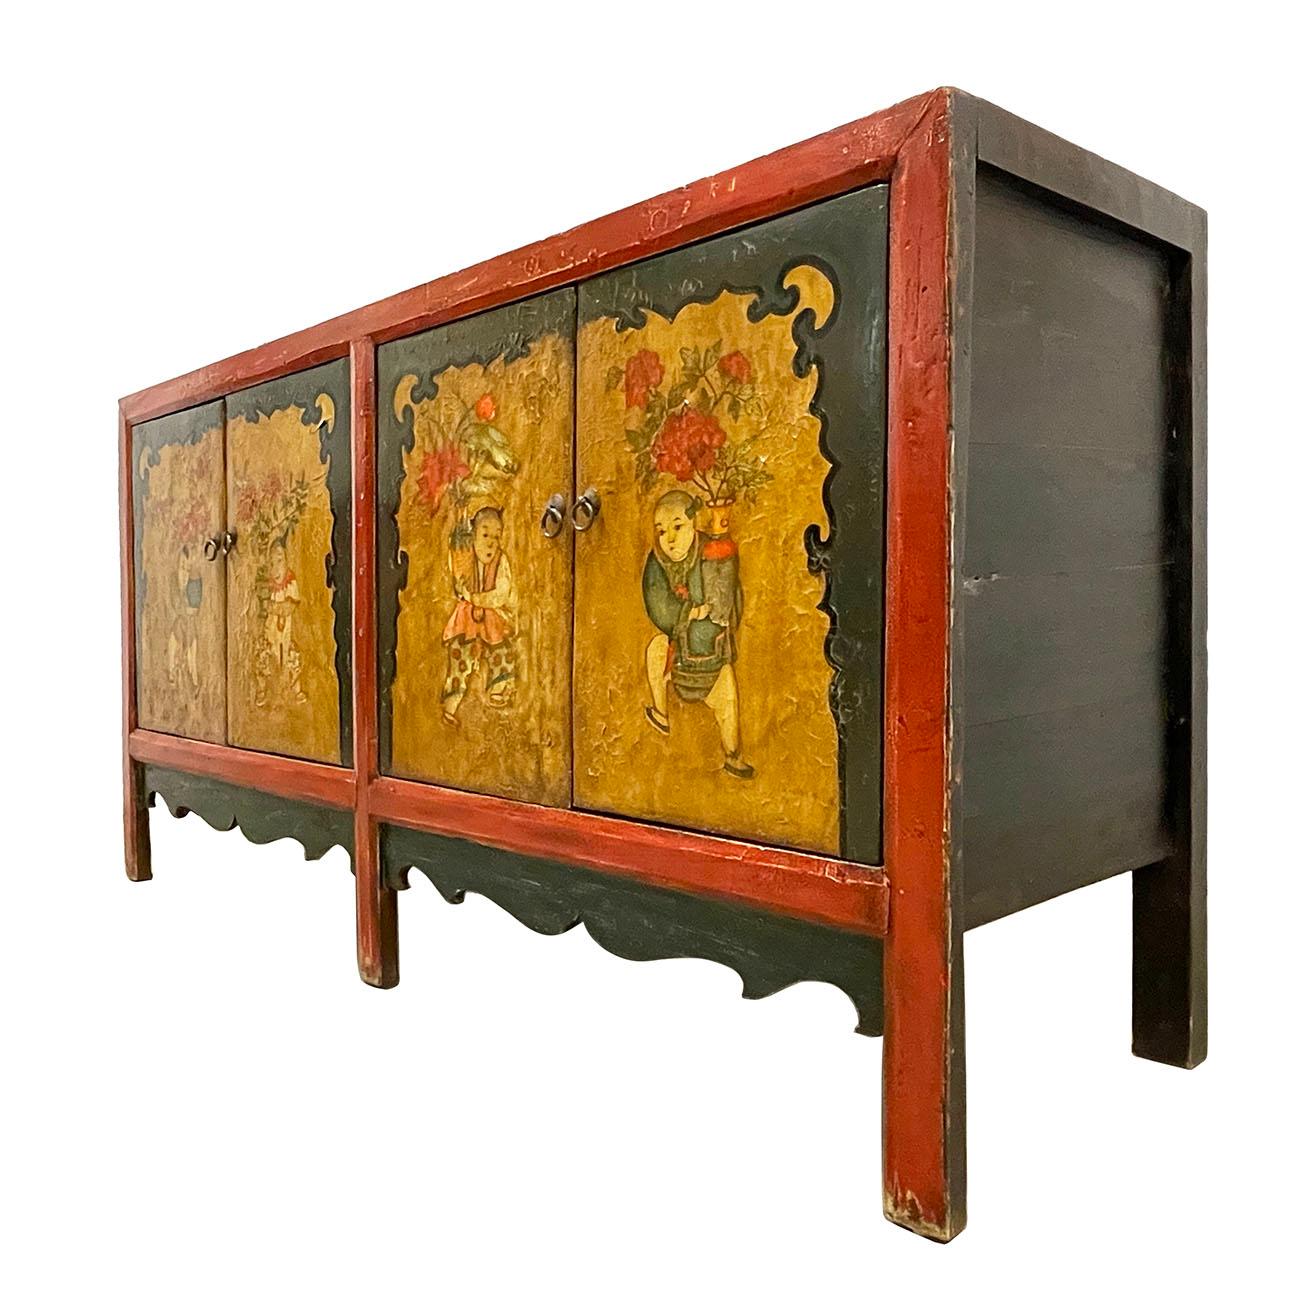 This Chinese Antique Hand Painted Credenza has about 150 years history with lacquer painting on front. It is made of solid wood with beautiful hand painted Chinese forks arts on the front doors. It featured 2 double open doors compartments on the